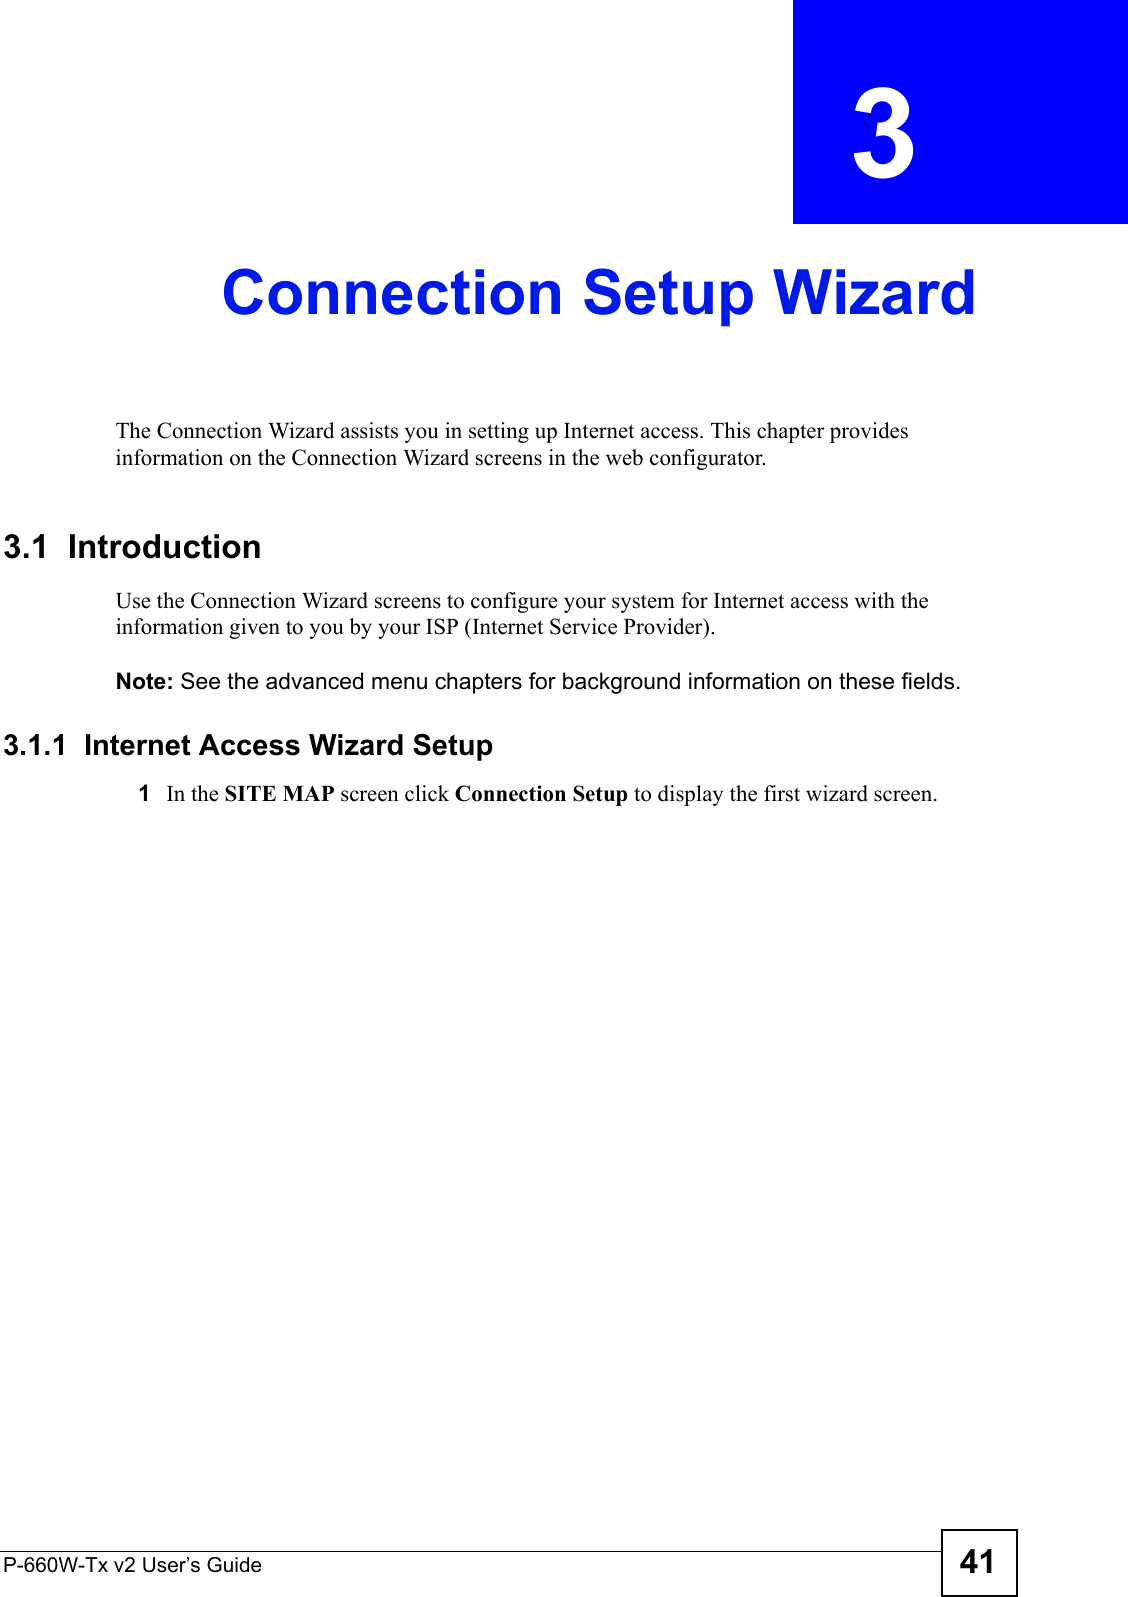 P-660W-Tx v2 User’s Guide 41CHAPTER  3 Connection Setup WizardThe Connection Wizard assists you in setting up Internet access. This chapter provides information on the Connection Wizard screens in the web configurator.3.1  IntroductionUse the Connection Wizard screens to configure your system for Internet access with the information given to you by your ISP (Internet Service Provider). Note: See the advanced menu chapters for background information on these fields.3.1.1  Internet Access Wizard Setup1 In the SITE MAP screen click Connection Setup to display the first wizard screen. 